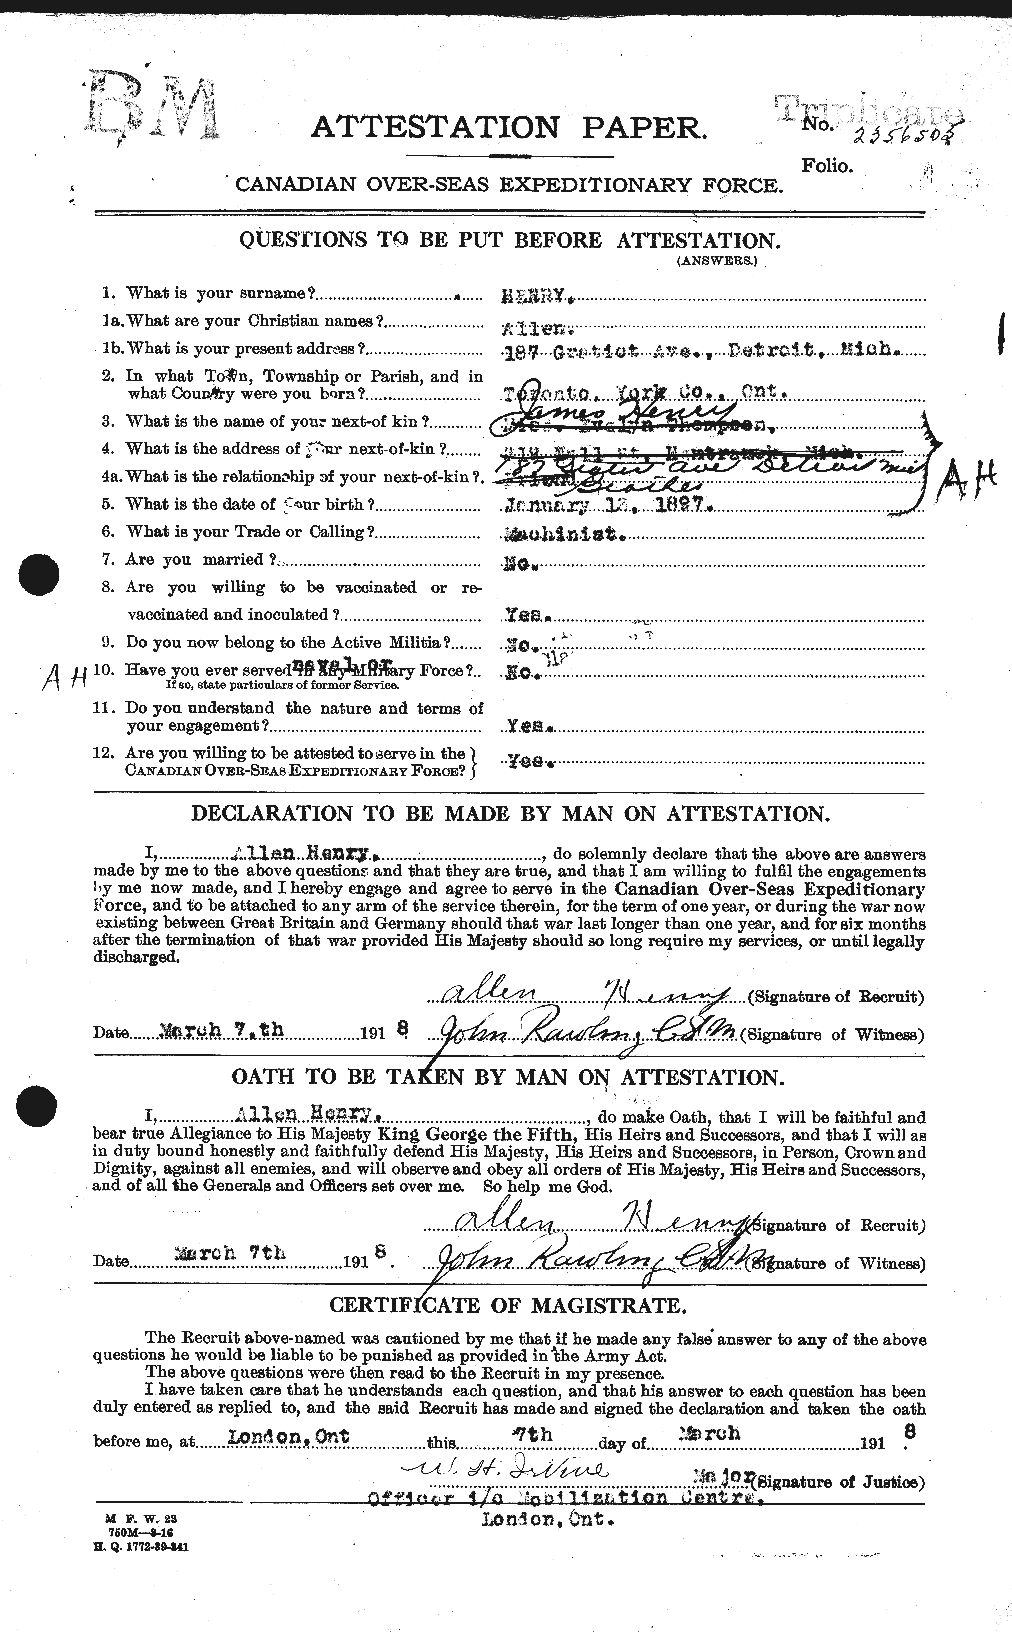 Personnel Records of the First World War - CEF 392772a